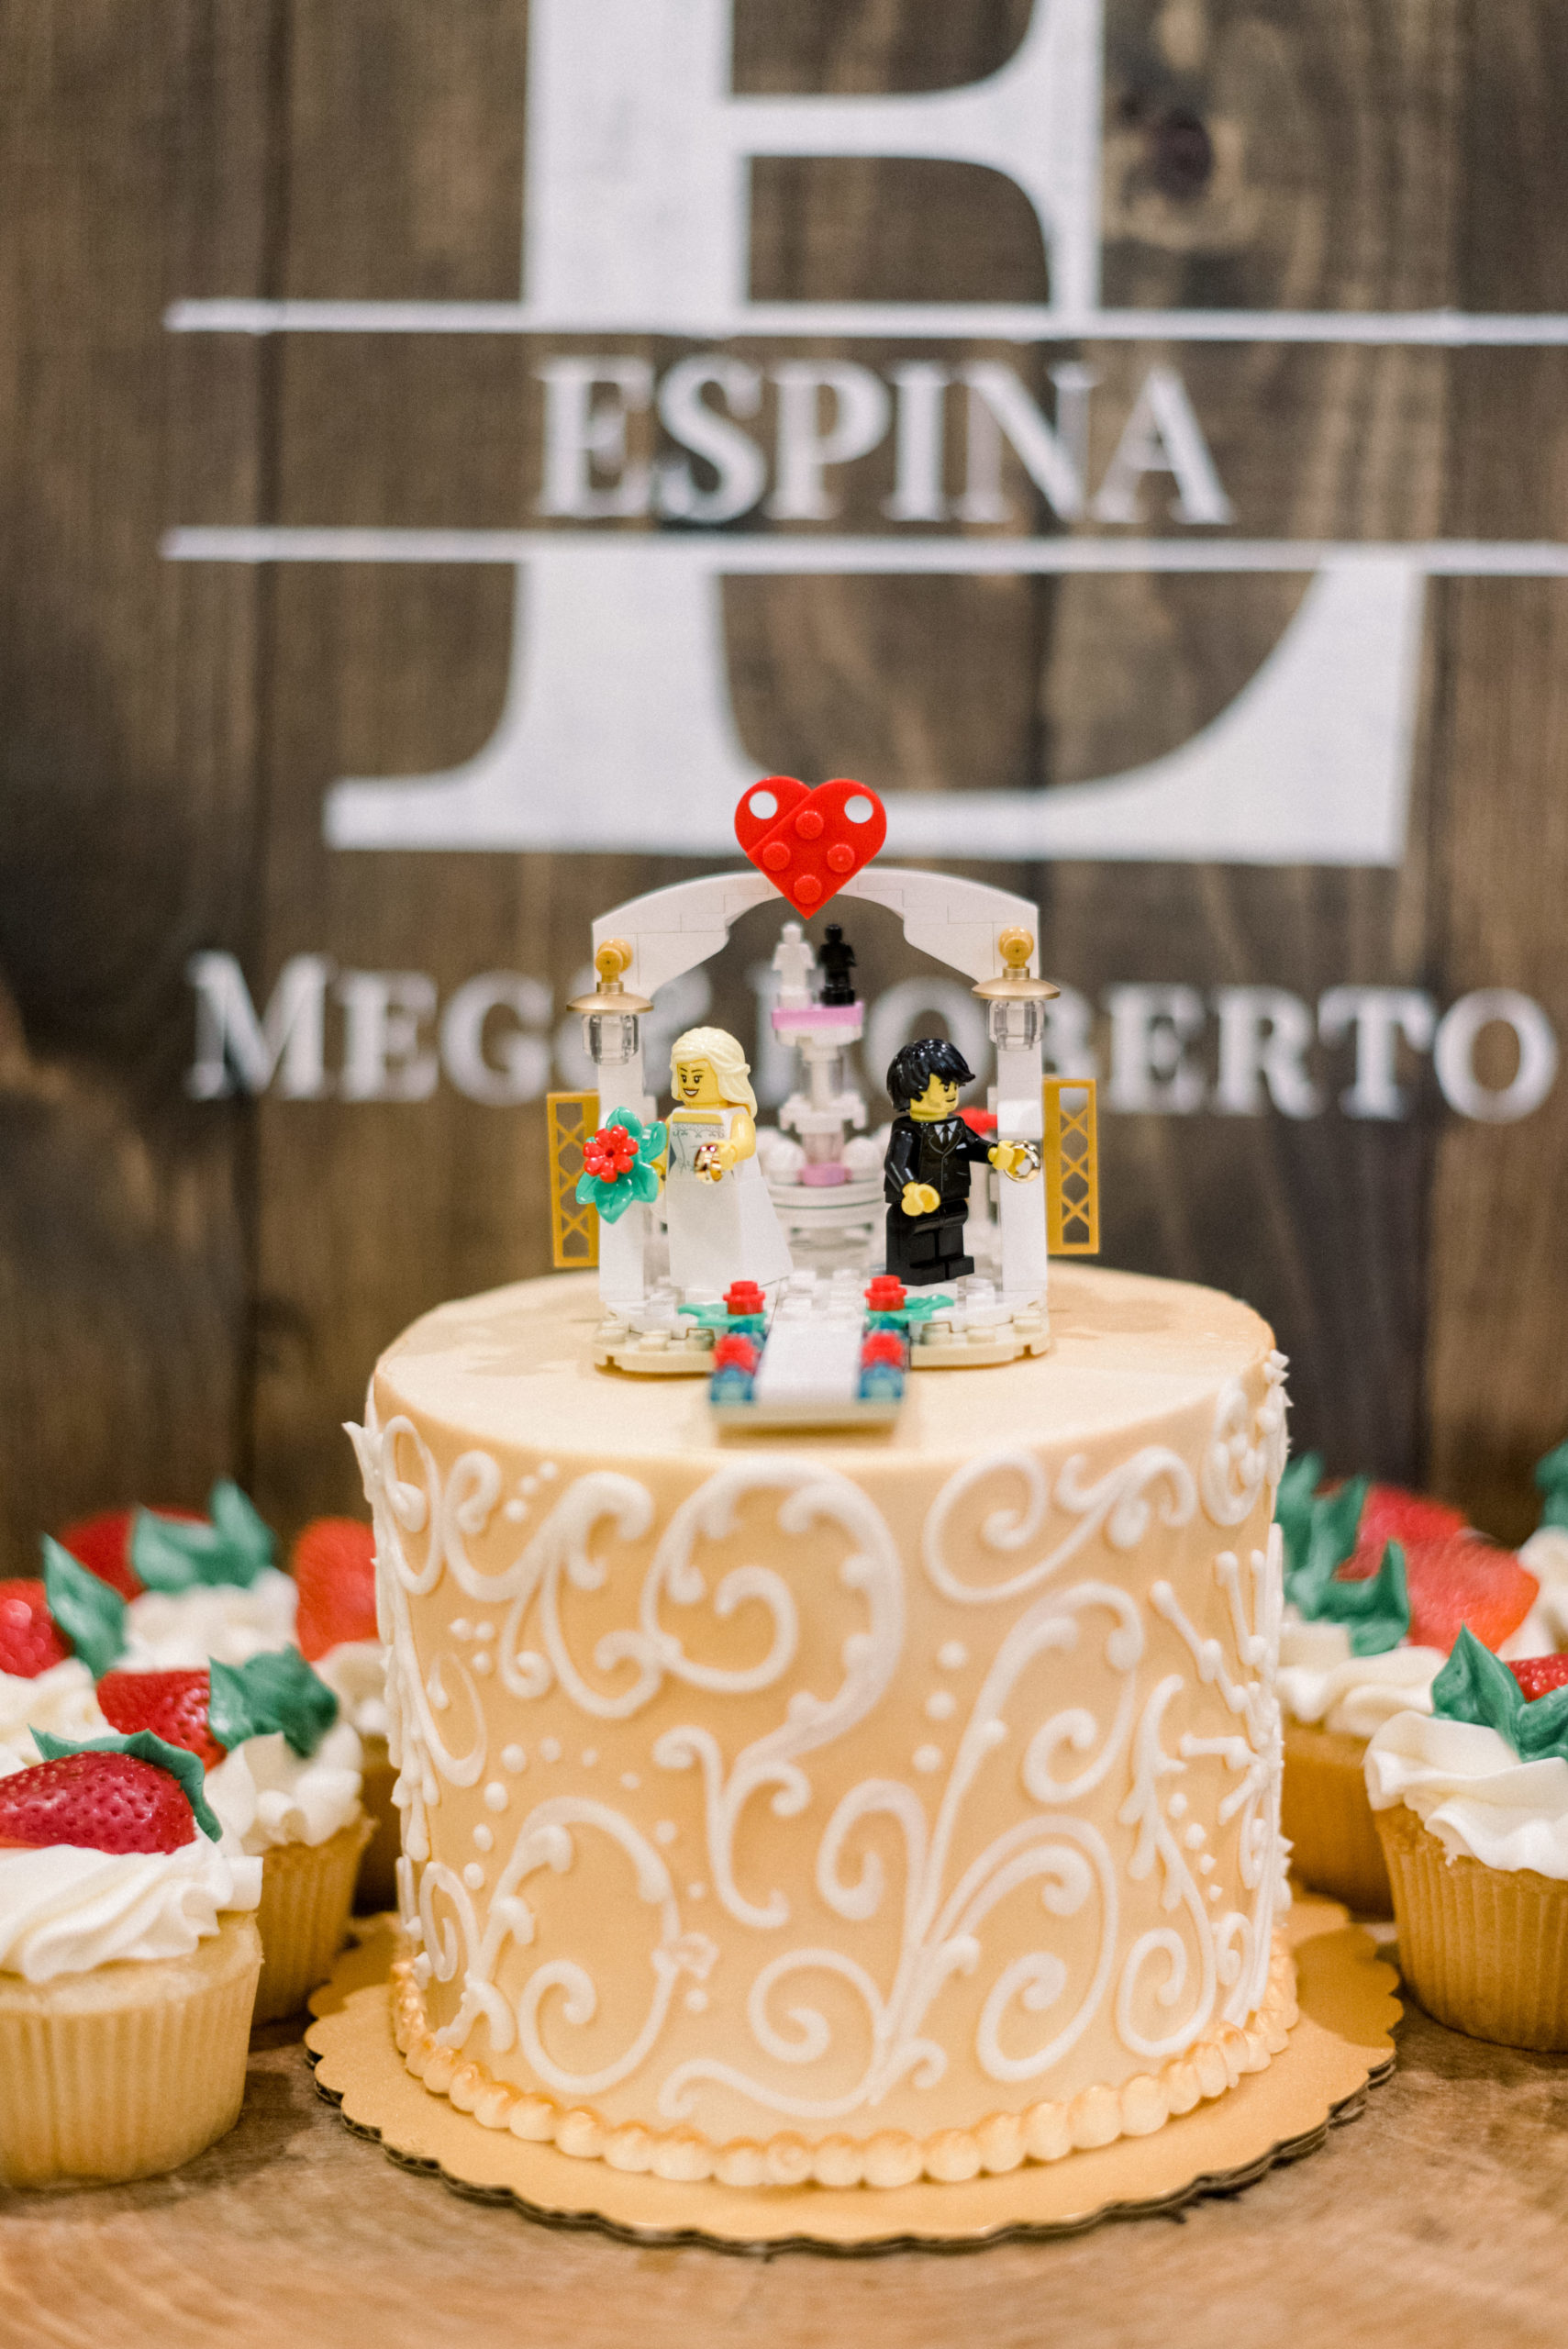 single tier cake with lego bride and groom on top